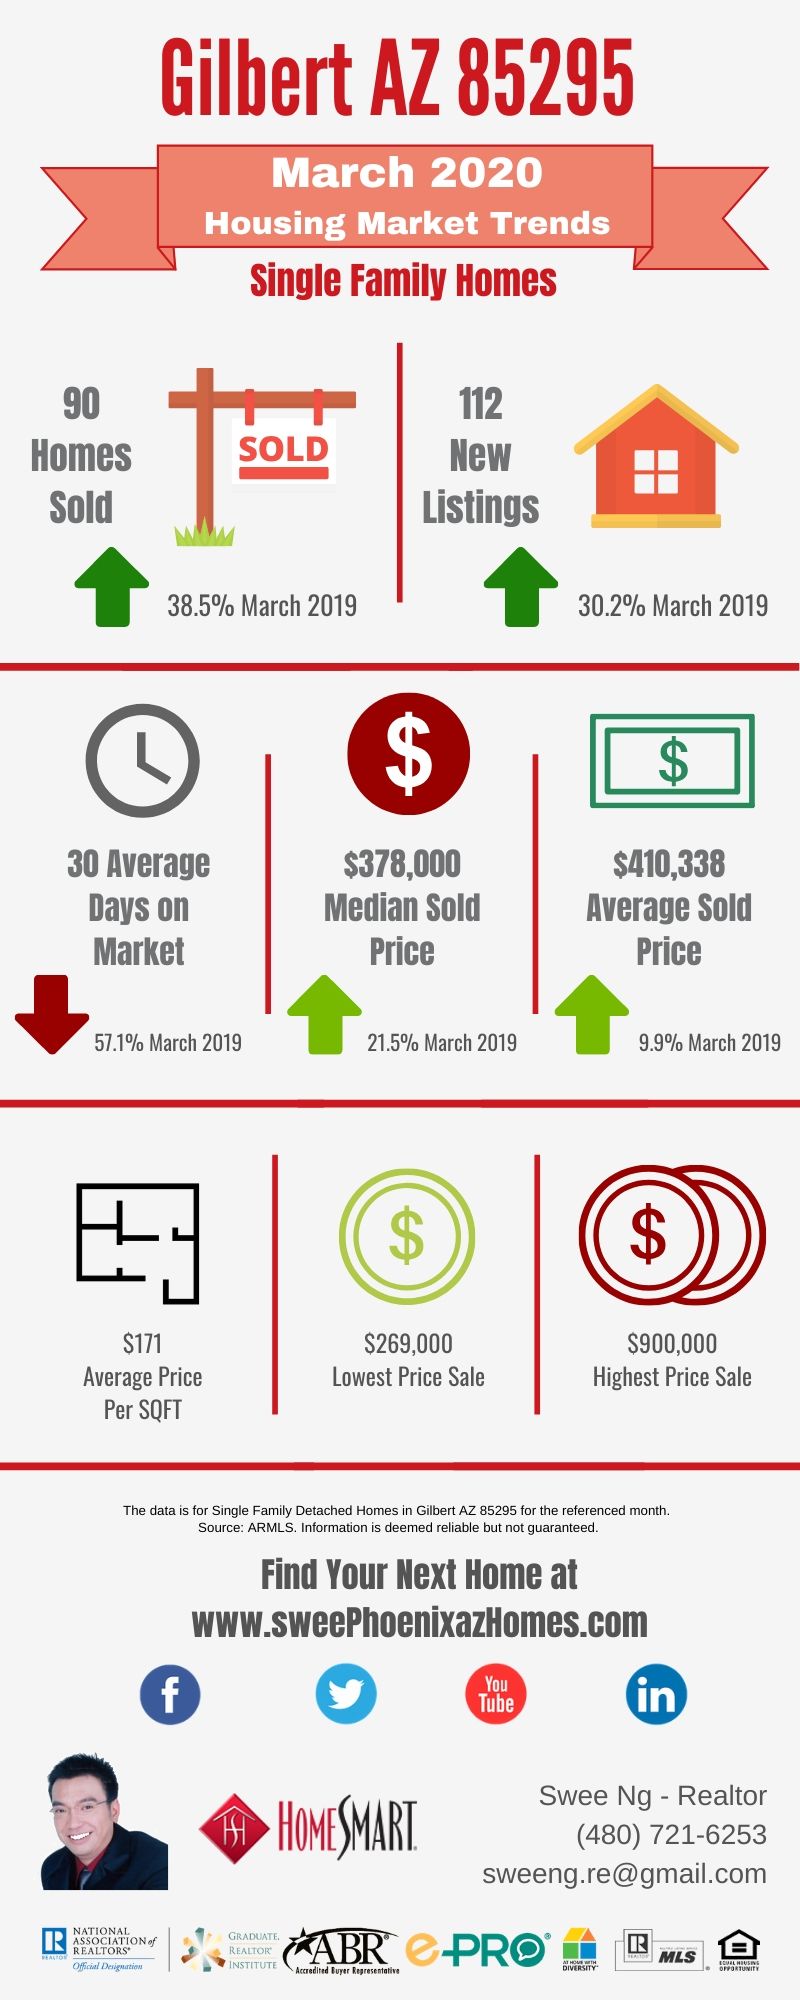 Gilbert AZ 85295 Housing Market Trends Report March 2020 by Swee Ng, Real Estate and House Value